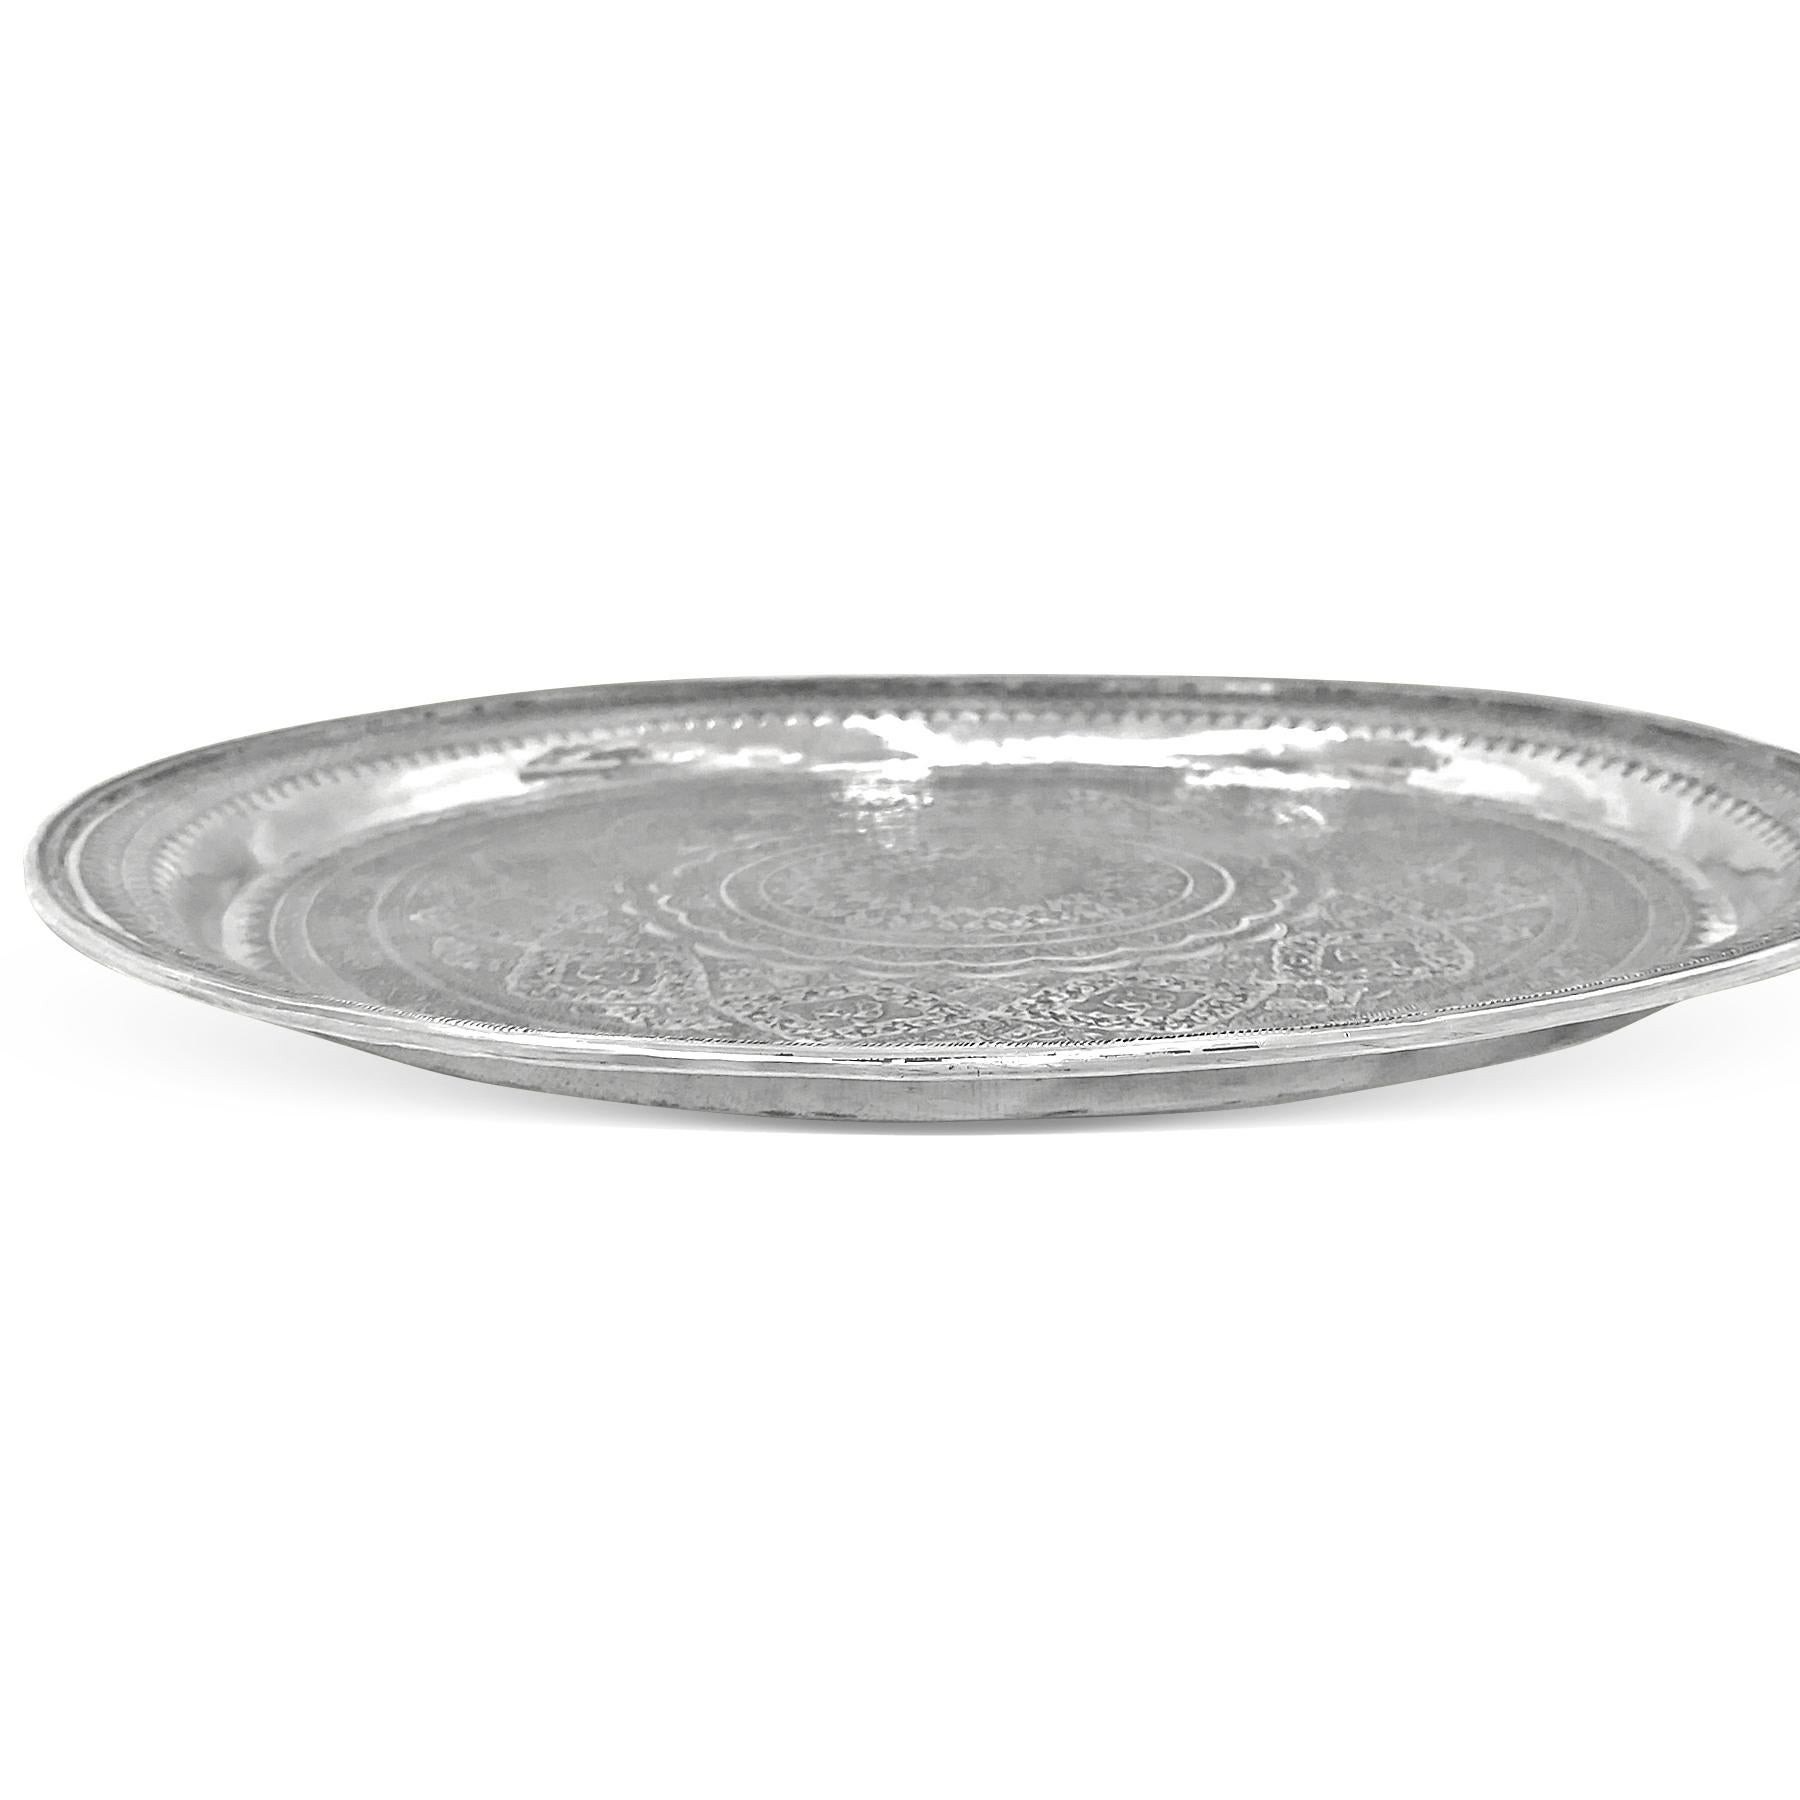 Vintage, Exotic, Old, Round Silver Tray, Extreme Detailed Hand Carved For Sale 1